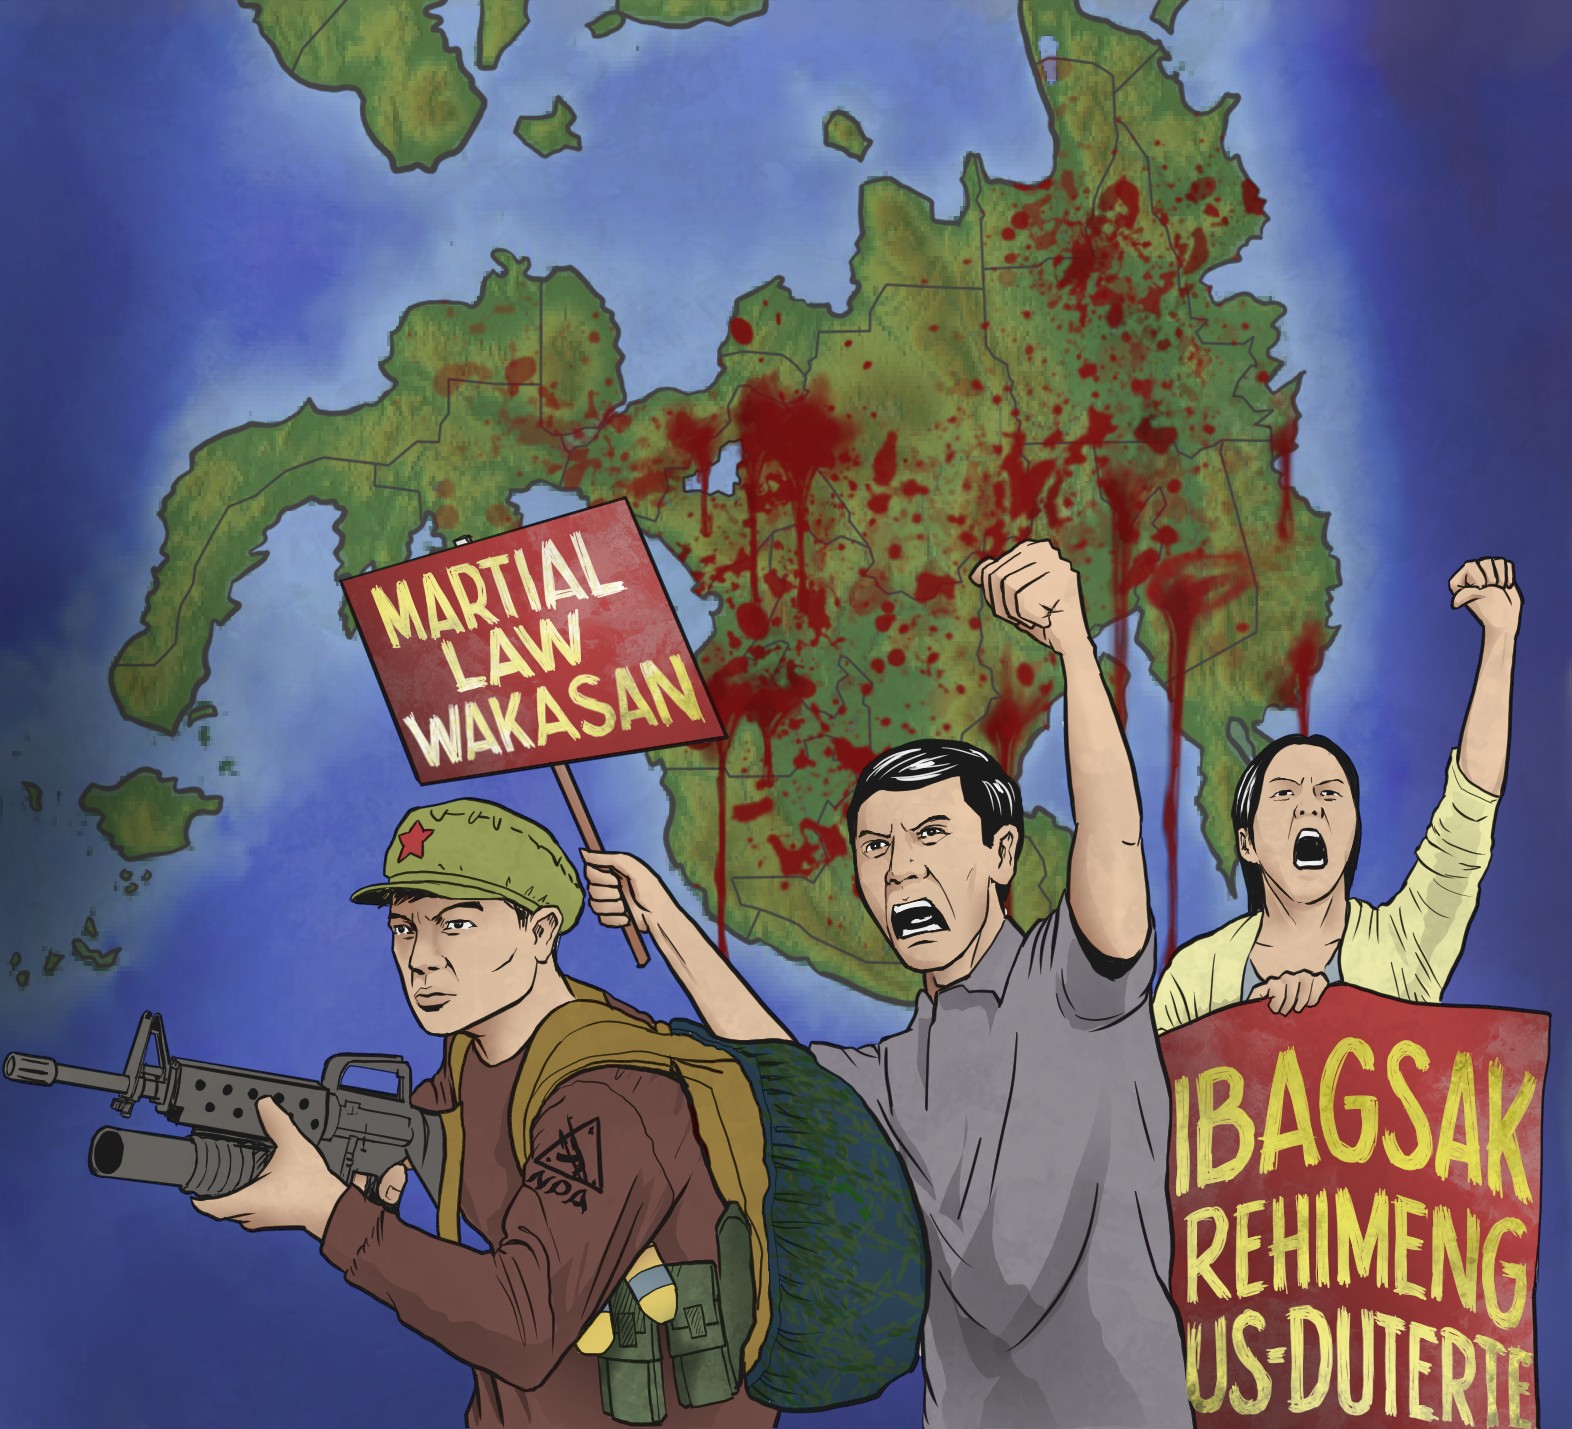 Ang Bayan End The Us Duterte Regimes Martial Law In Mindanao 3205